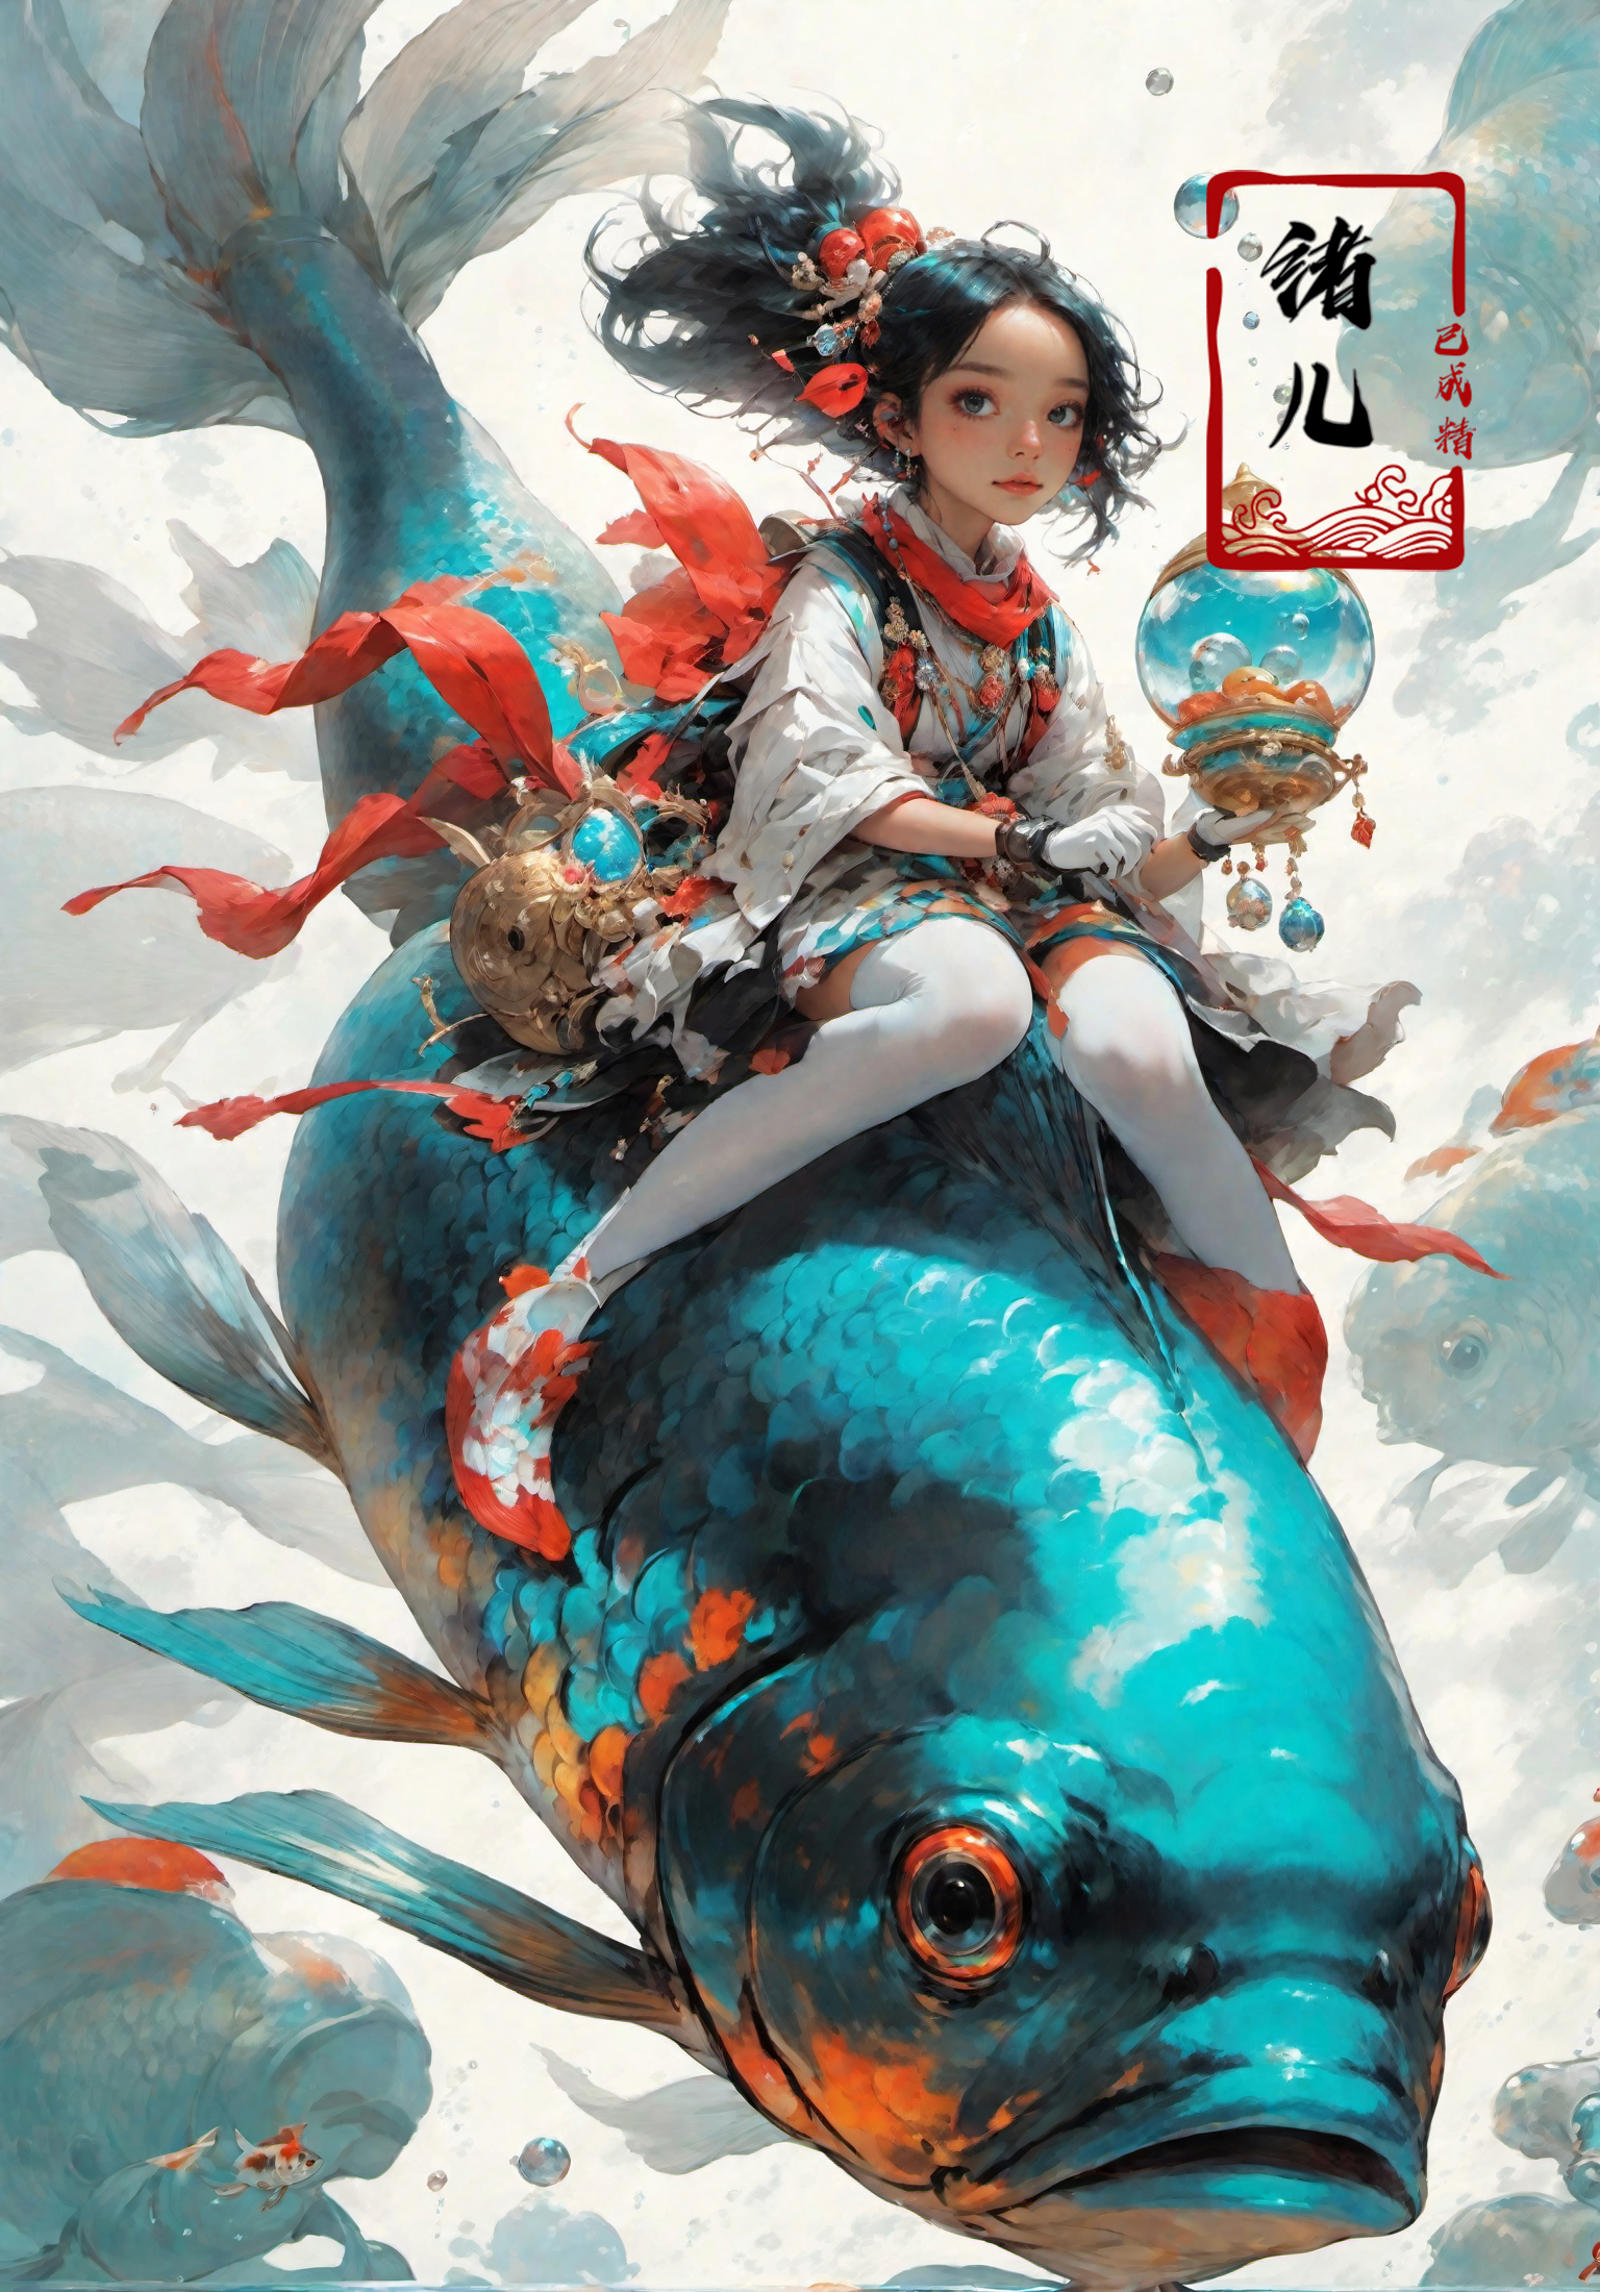 A beautifully colored painting of a girl riding a fish, with a red ribbon around its neck.